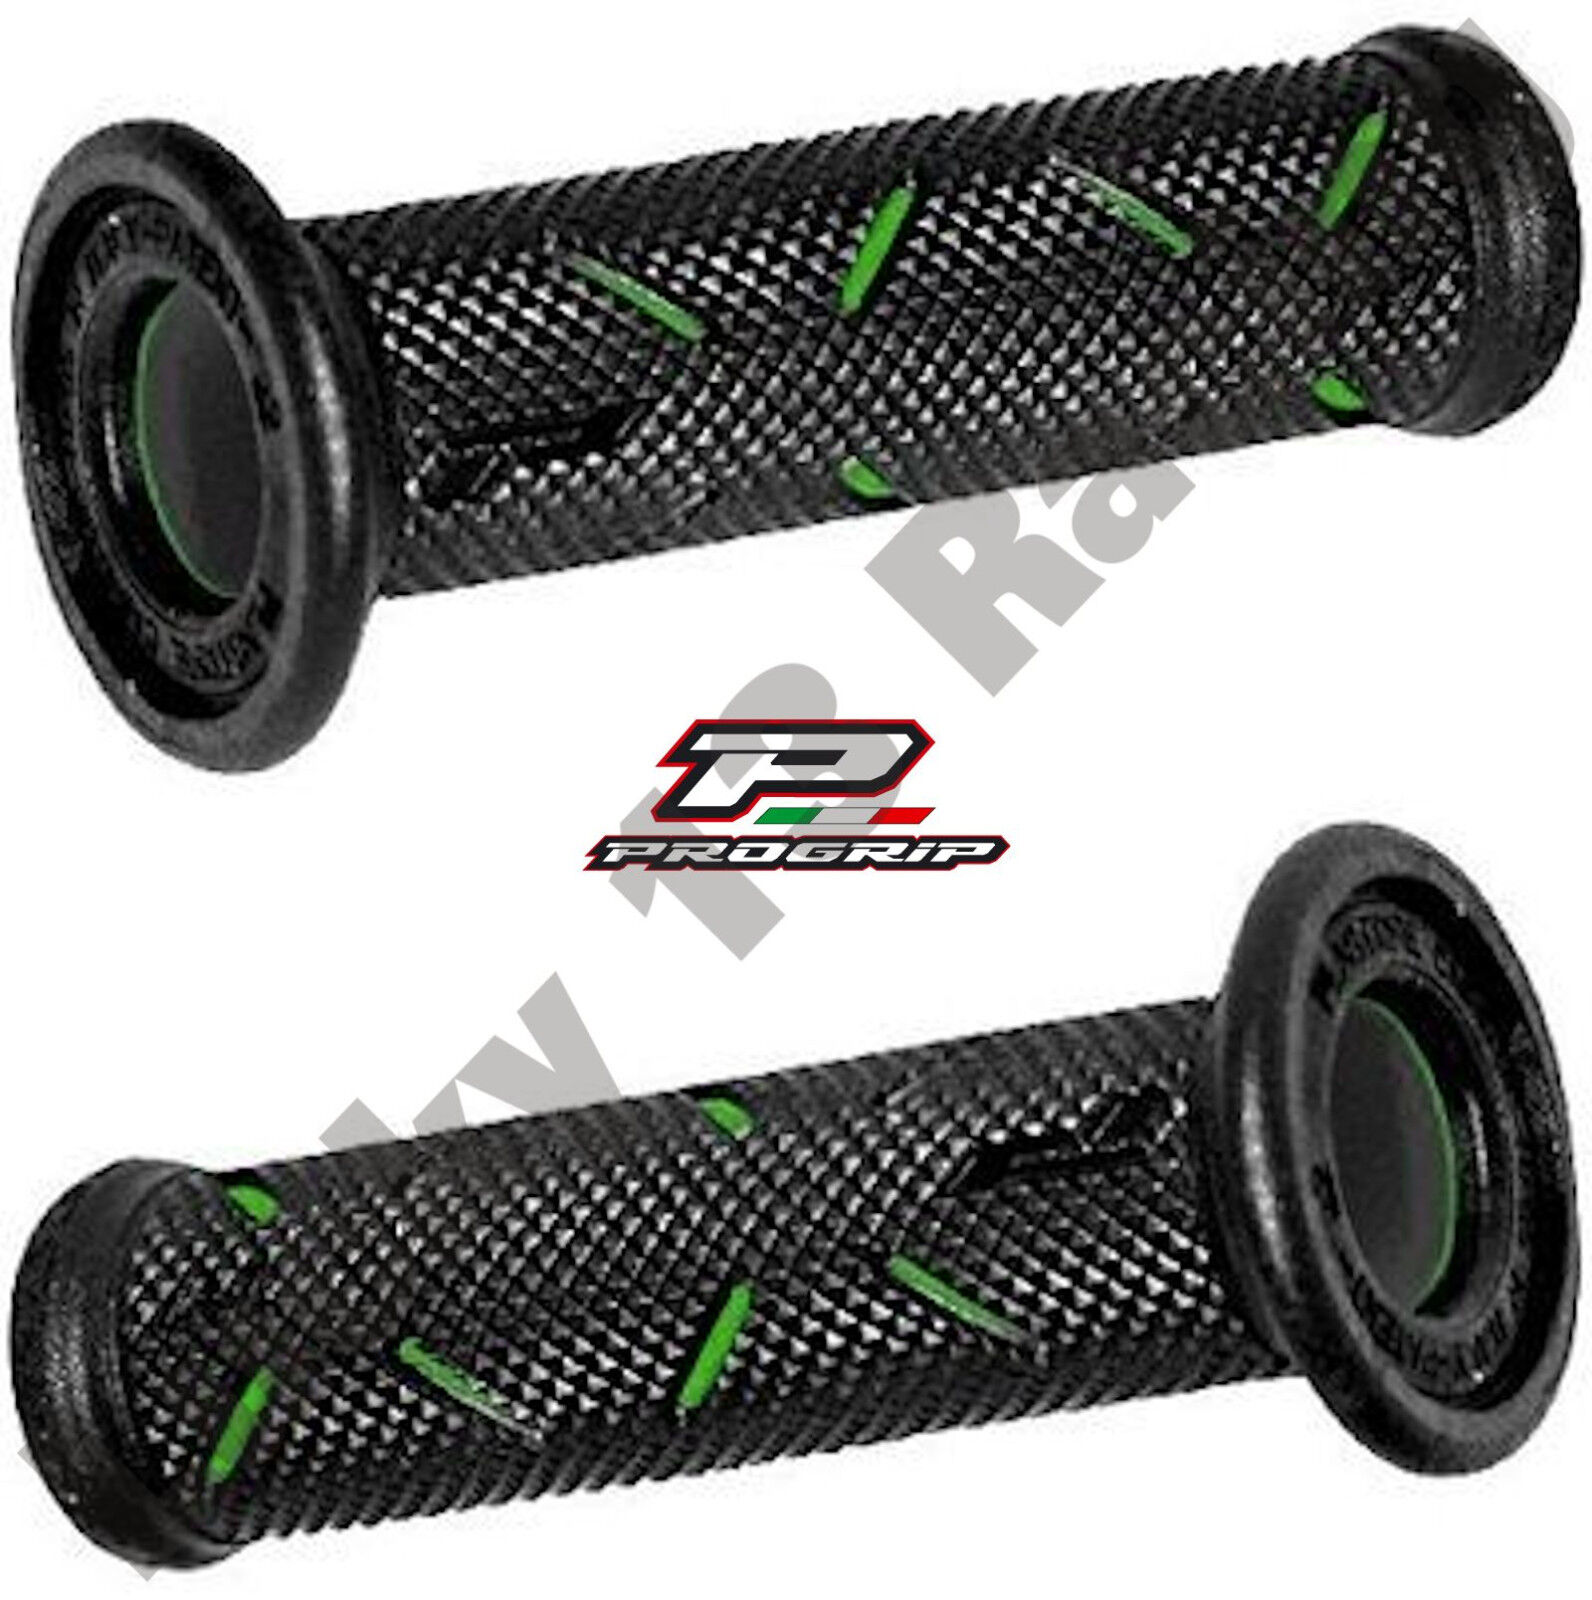 Progrip Gel Touch Dual Compound Grips GREEN pair to fit 22mm 7/8" handle bars 